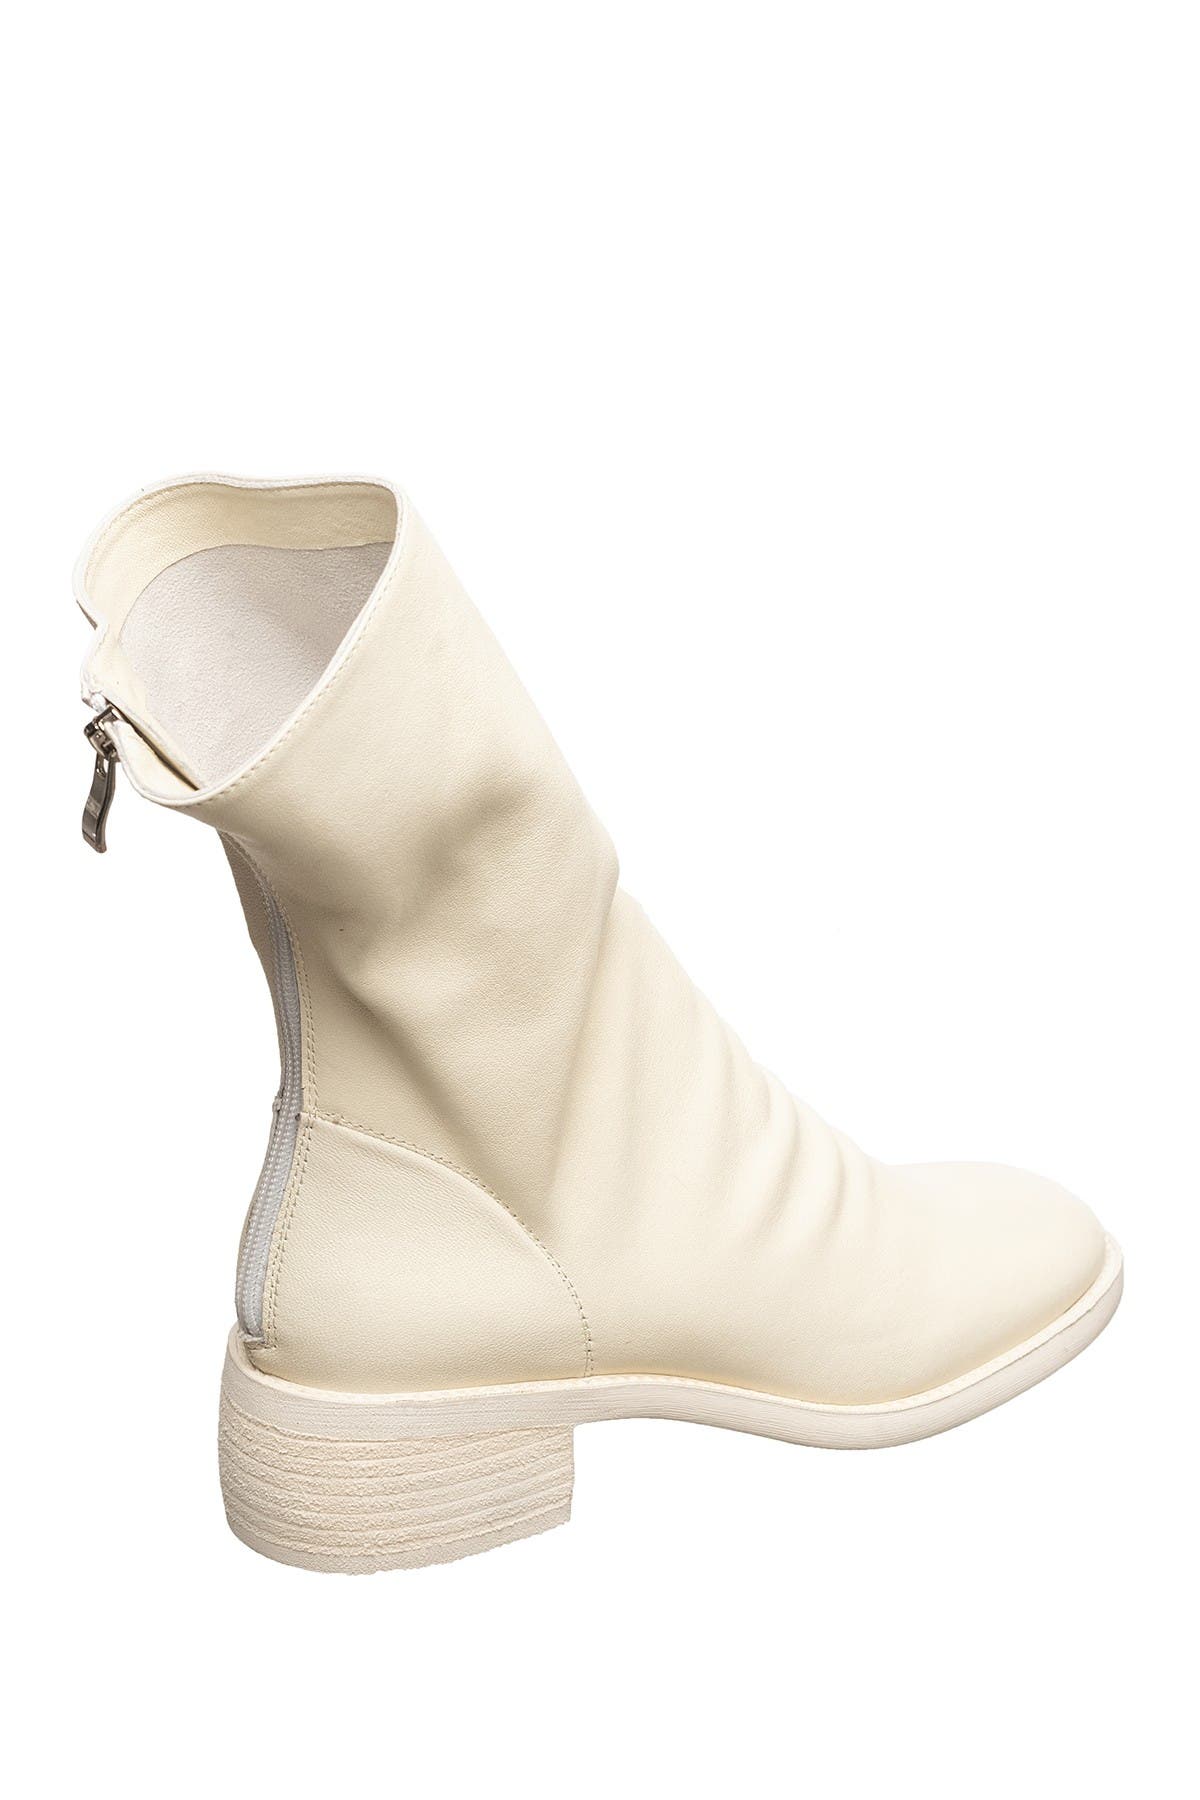 Antelope Ruched Leather Boot In Oxford